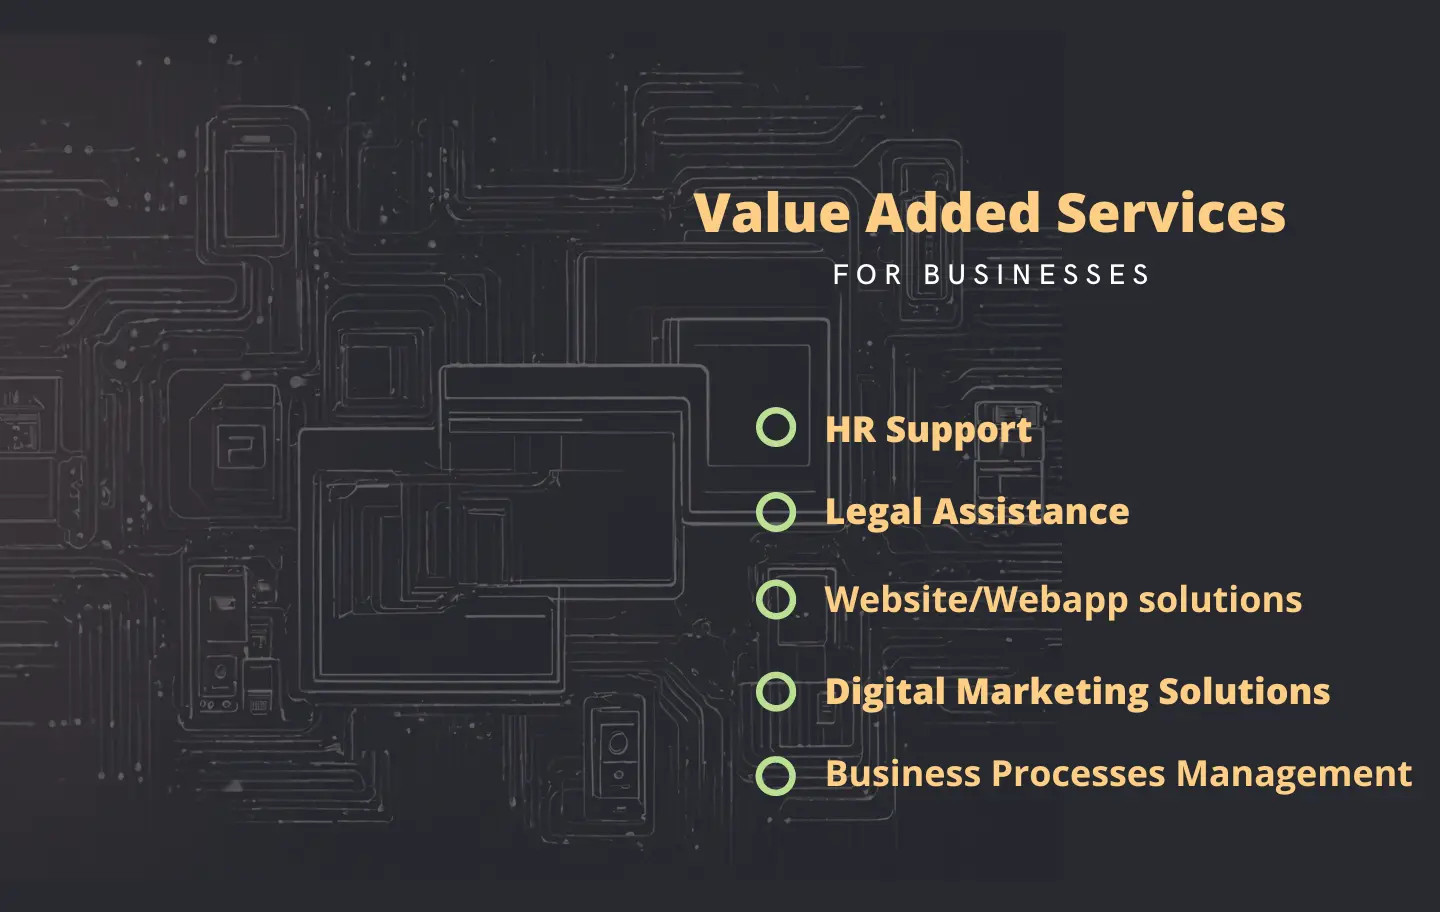 Value Added services for businesses and new start-ups in Pakistan looking for solutions including HR, Website Design, e-commerce Shopify and woocommerce stores, Web app design. Mobile app design, Digital Marketing, FBR Registeration. Legal Documentation and Business process management at the lowest rates in Lahore.